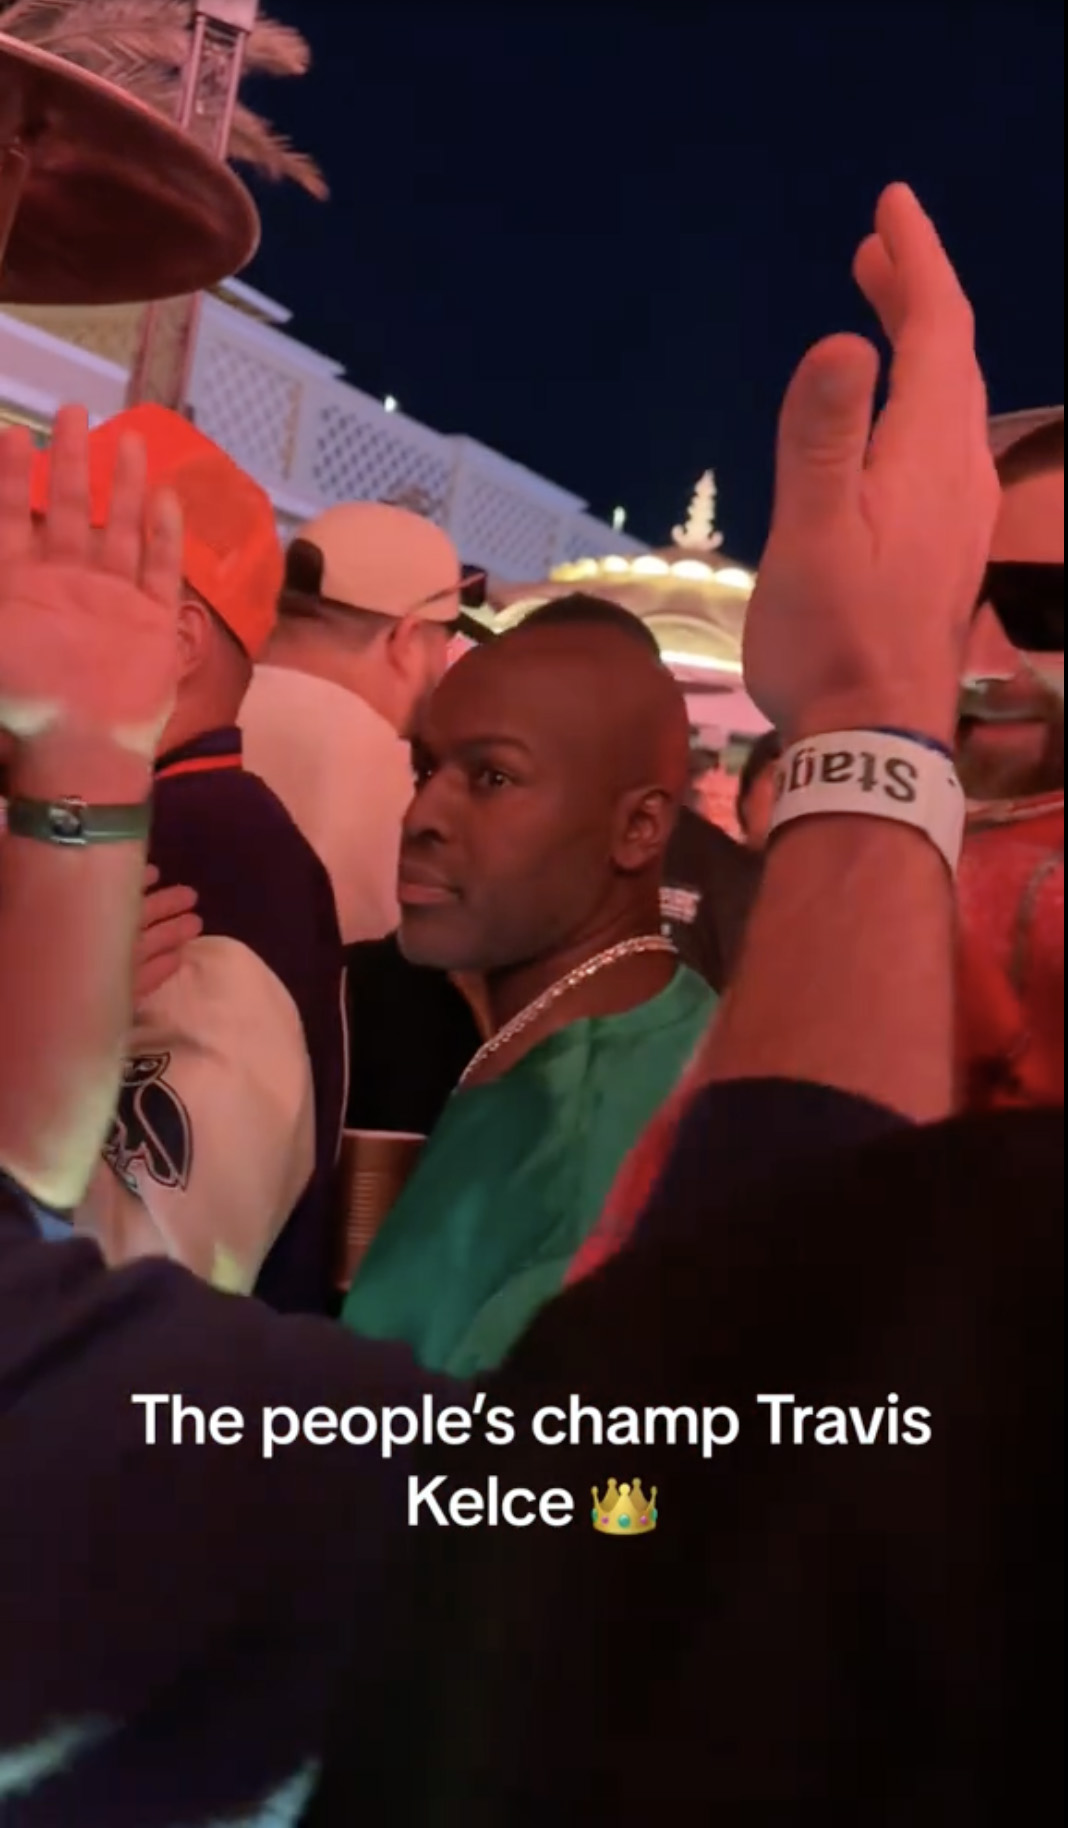 Corey was spotted in a video from a Super Bowl party in Las Vegas, Nevada